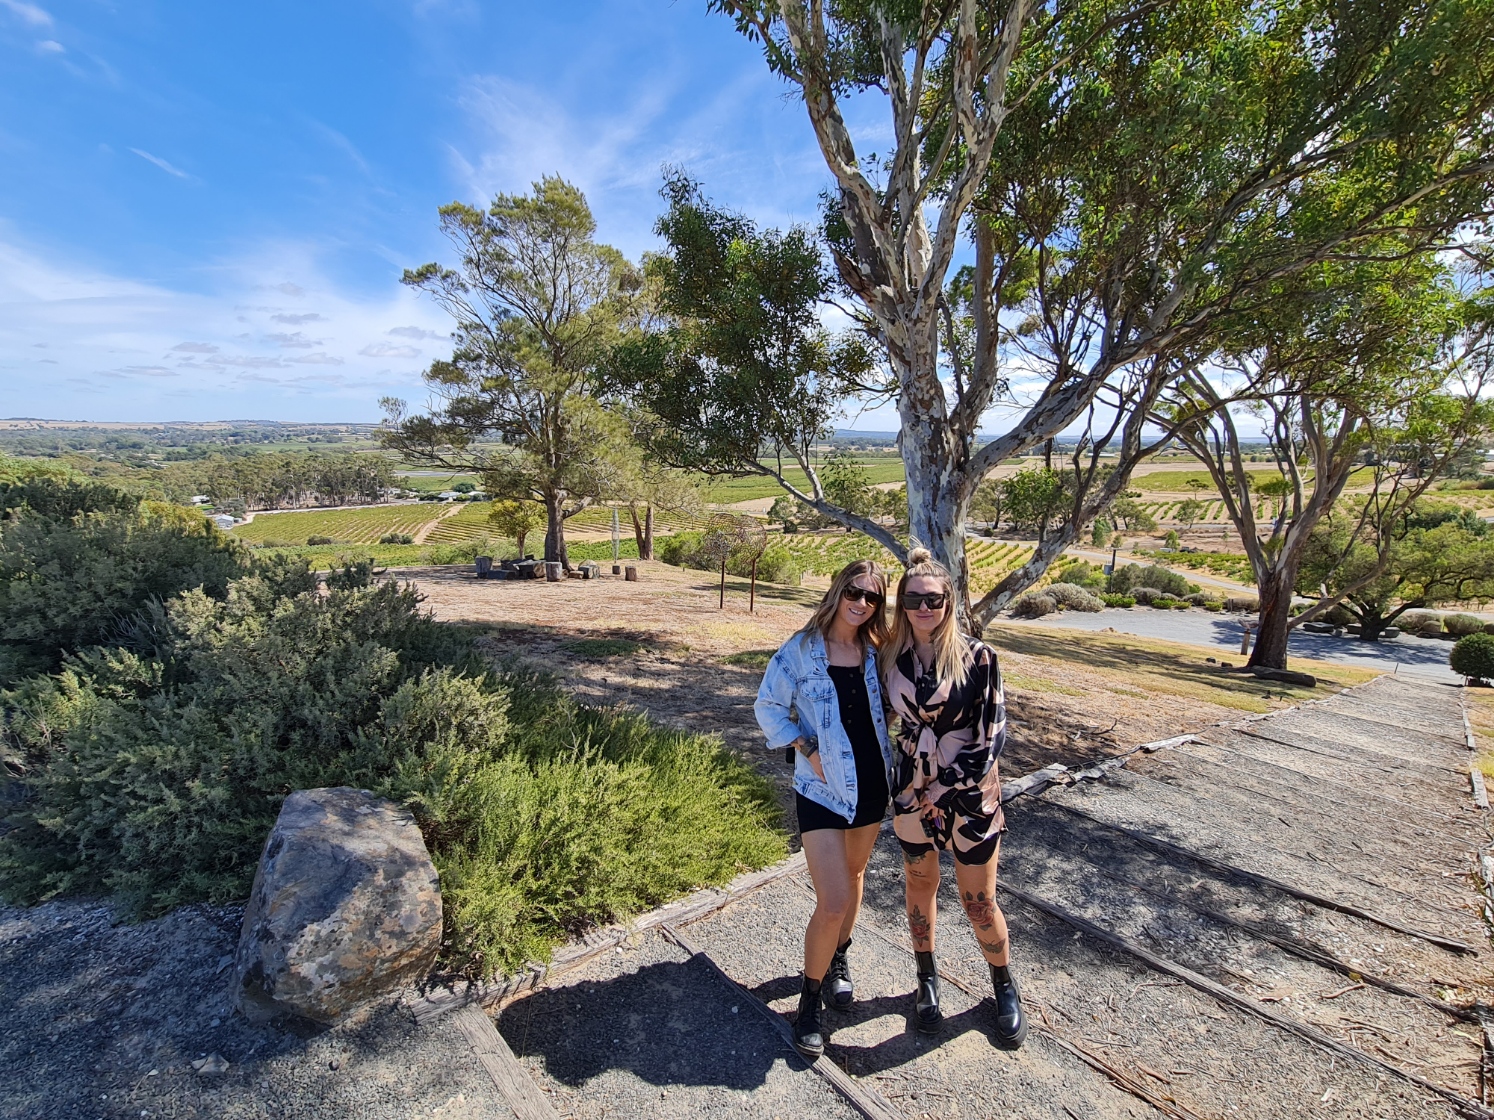 A Private Barossa Valley Tour including lunch.